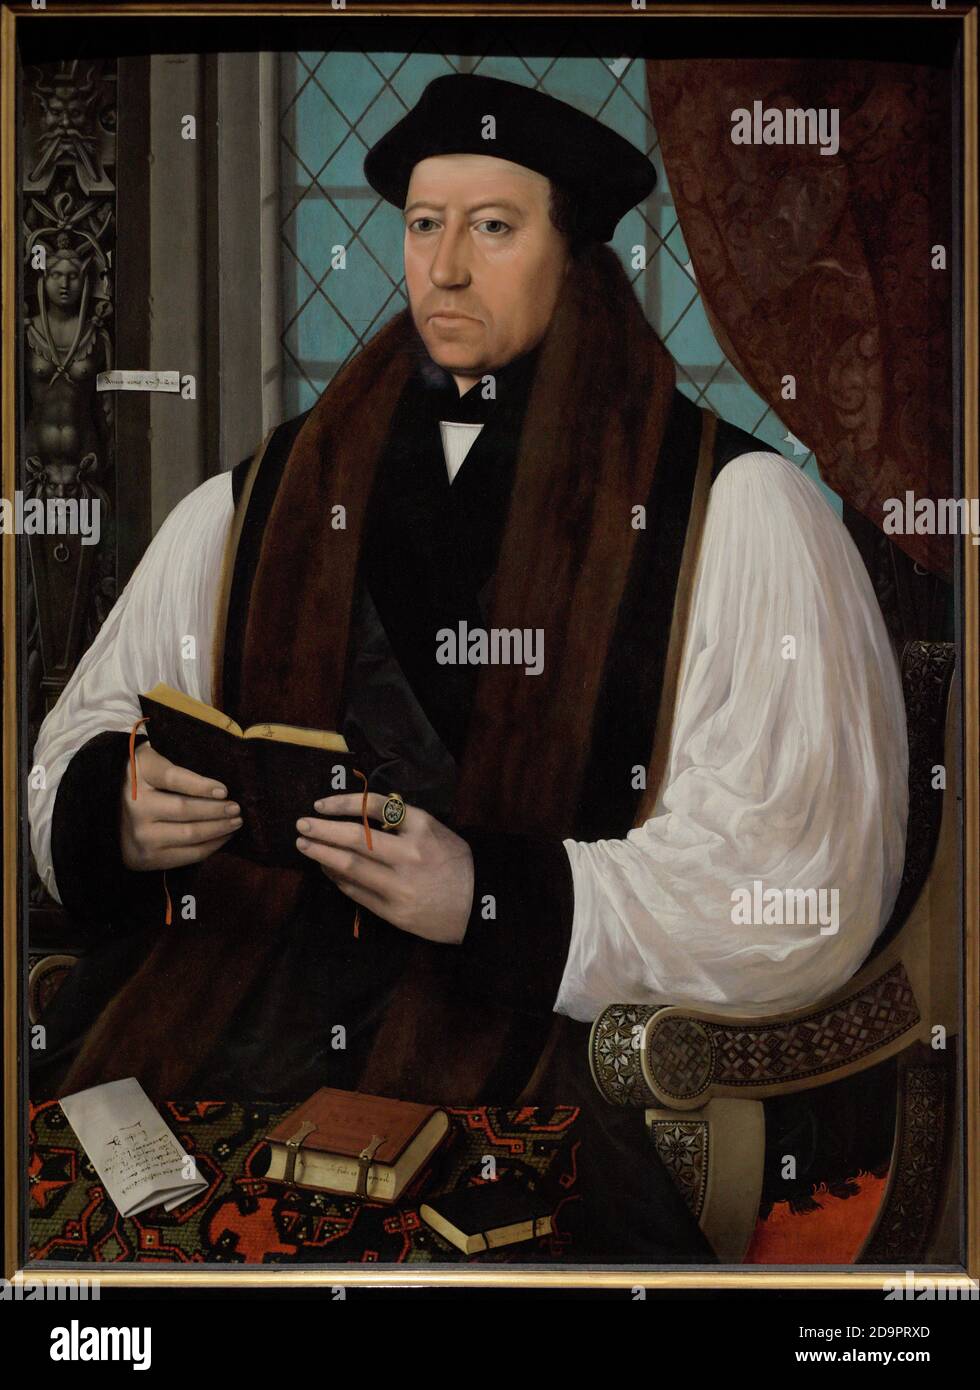 Thomas Cranmer (1489-1556). The first Protestant archbishop of Canterbury. Adviser to the English kings Henry VIII and Edward VI. He was denounced by the Catholic queen Mary I for promoting Protestantism, convicted of heresy and burned at the stake. Portrait by Gerlach Flicke (active 1545-died 1558). Cranner is depicted holding the Epistles of St Paul. Oil on panel, 1545. National Portrait Gallery. London, England, United Kingdom. Stock Photo